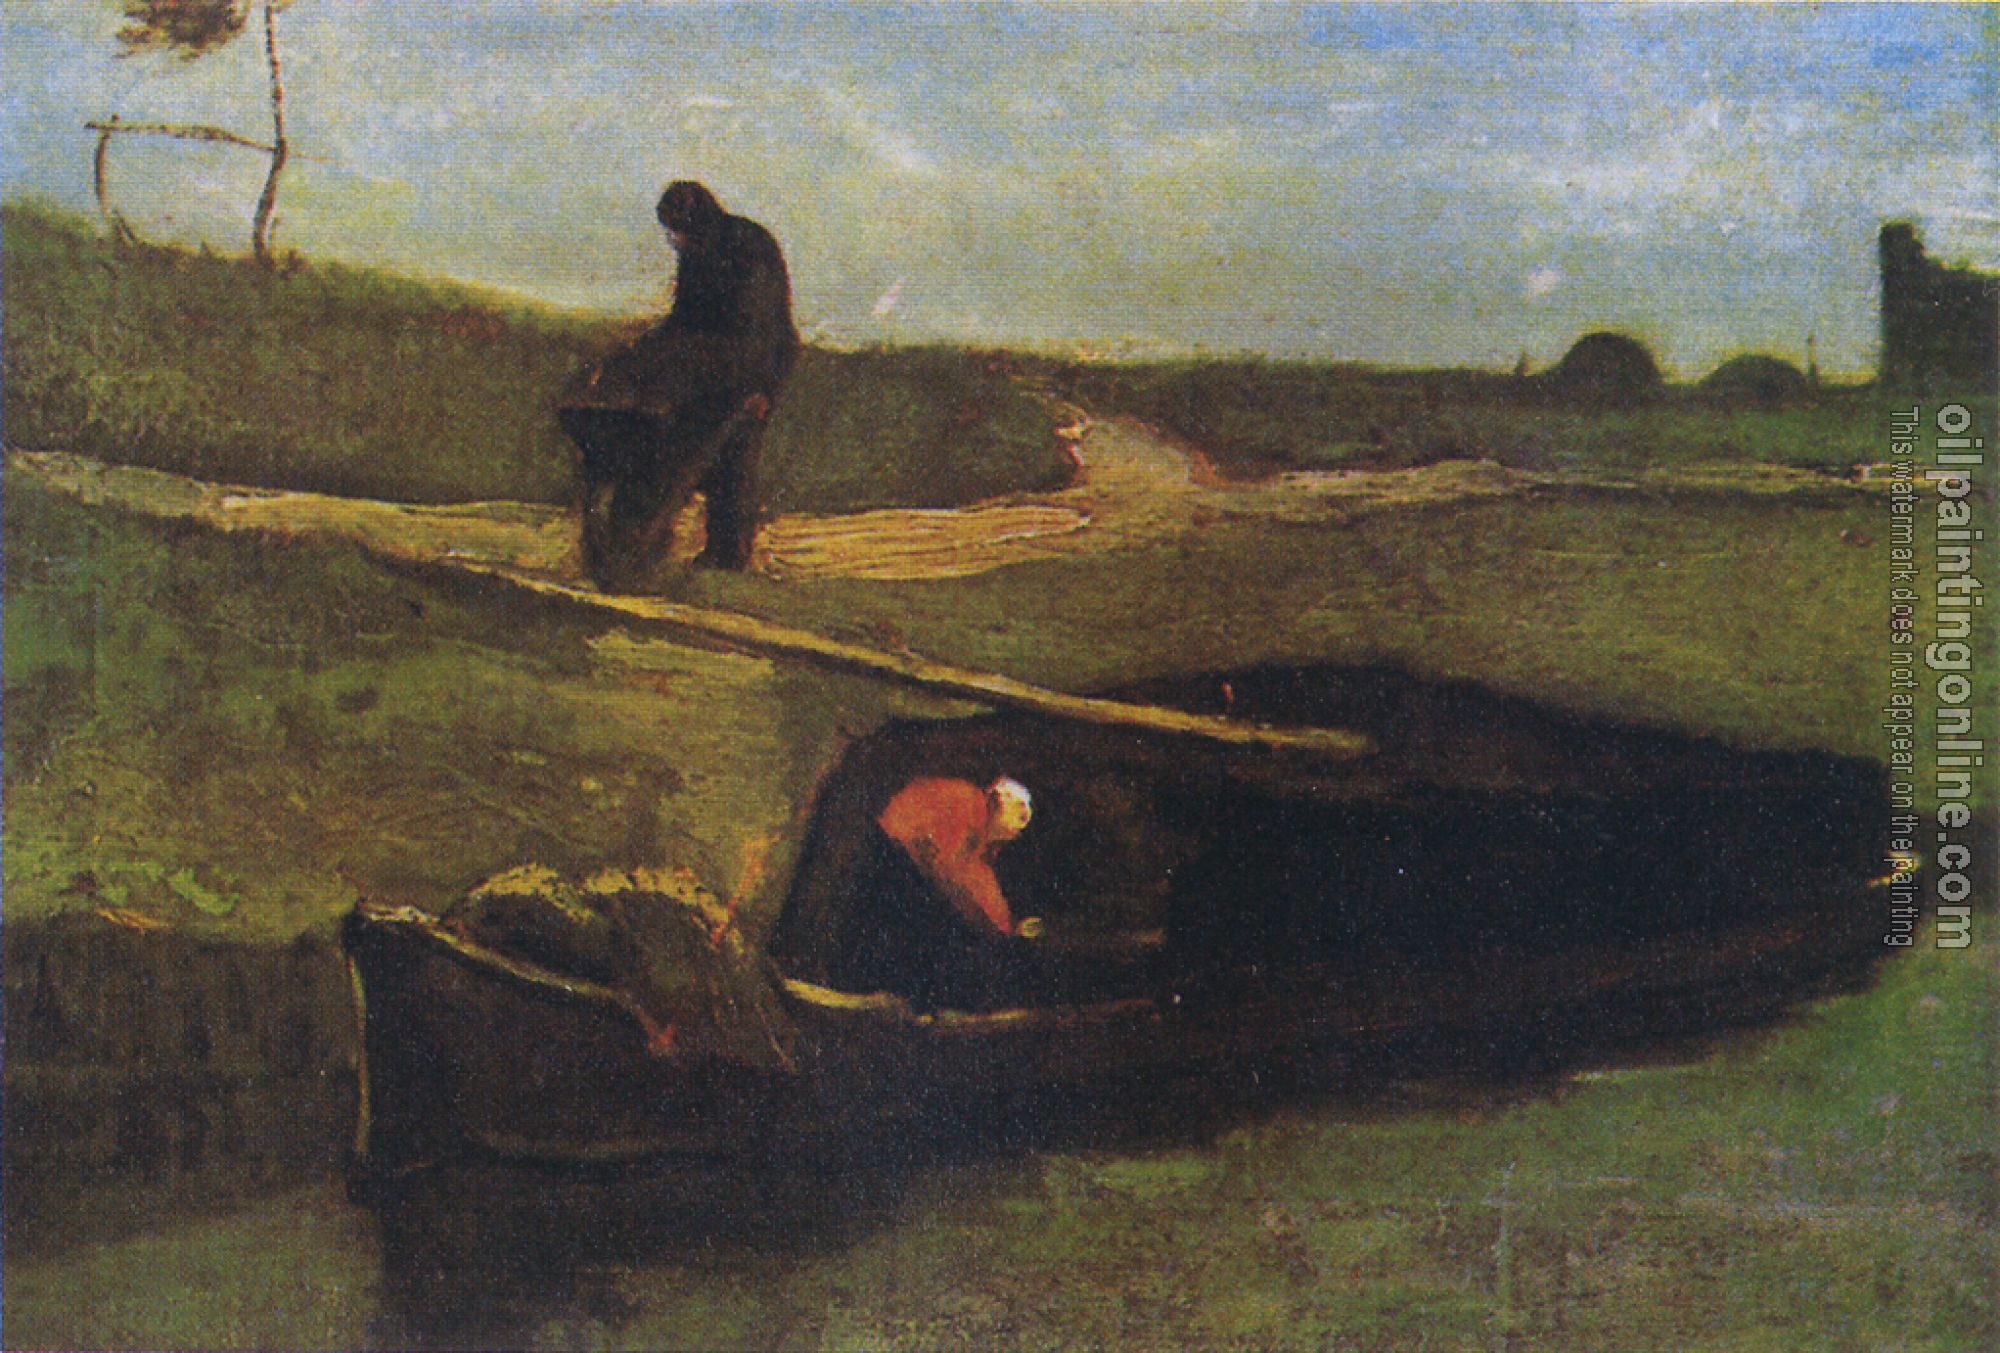 Gogh, Vincent van - Peat boat with two figures